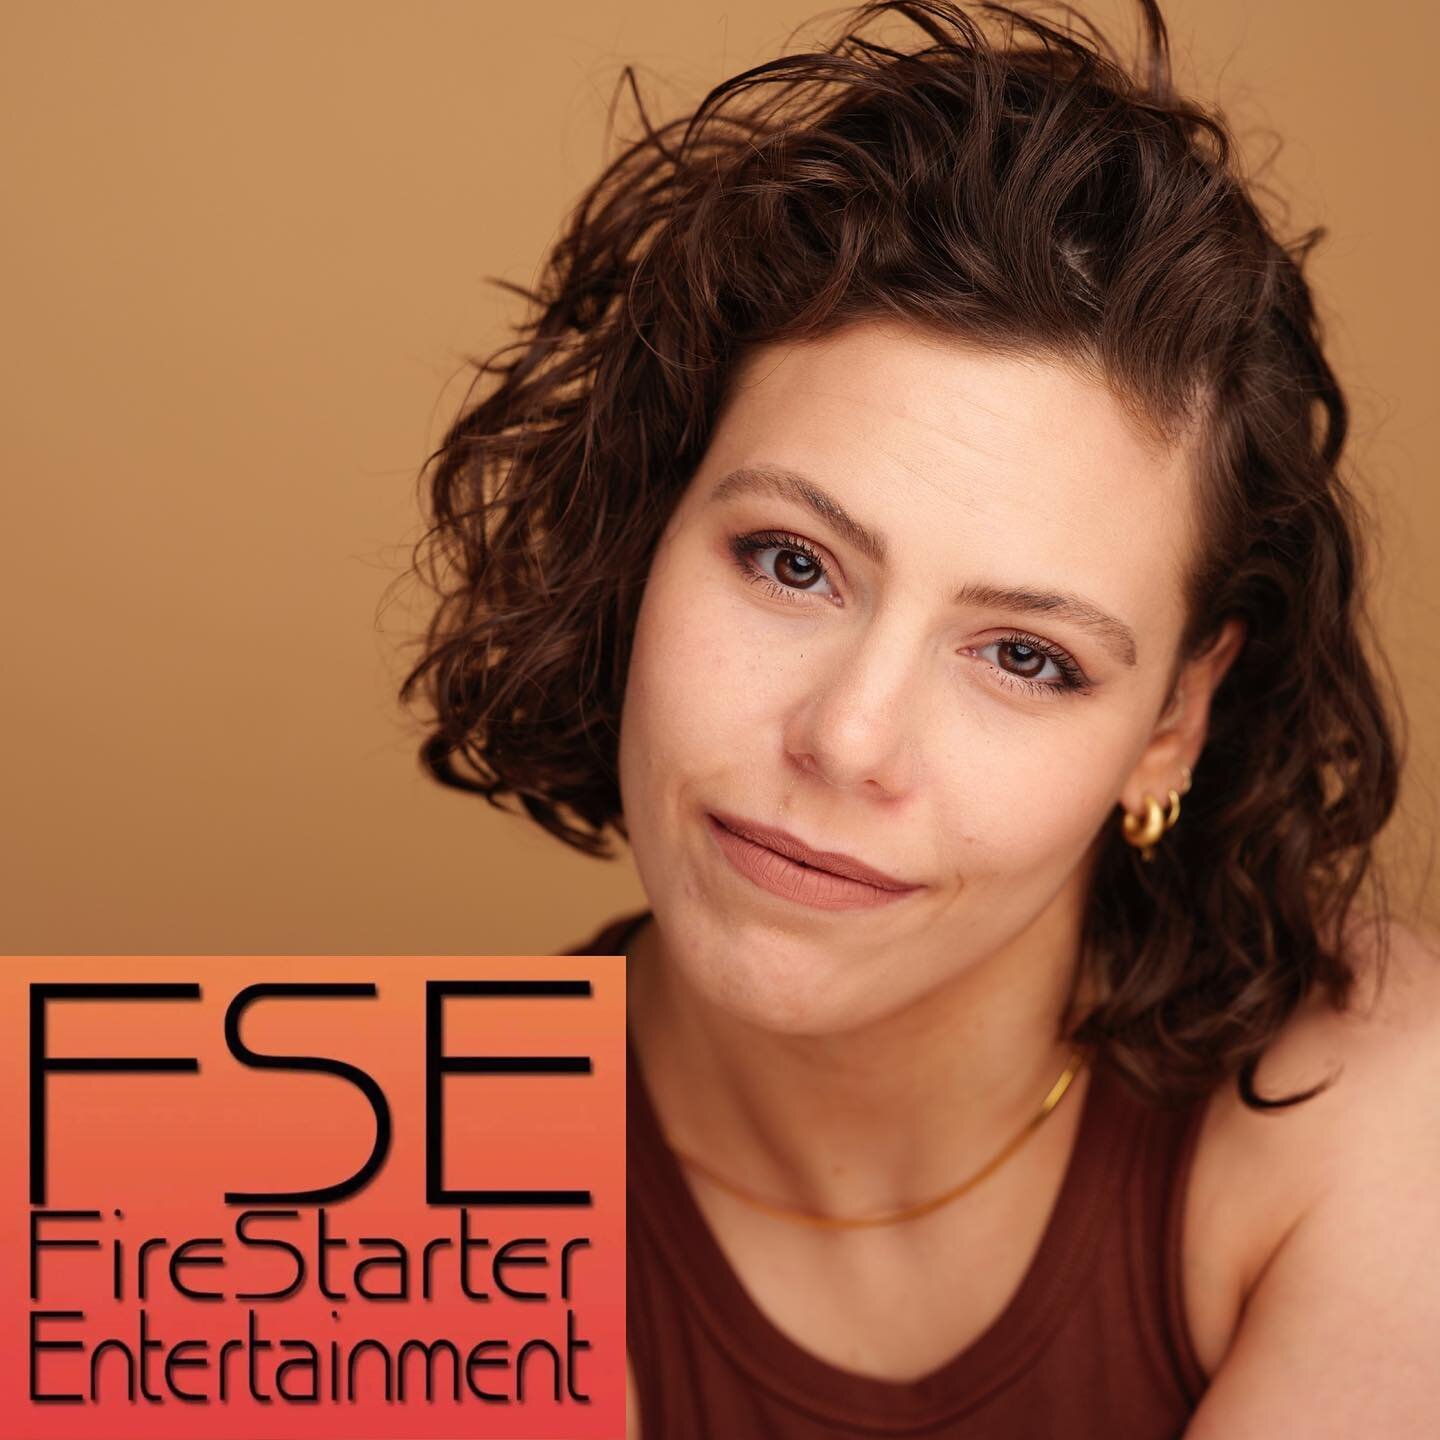 So excited to announce to the world that I&rsquo;ve signed with @fsetalent !! 

Hard consistent work really does pay off. Can&rsquo;t wait to see where this next chapter takes me!